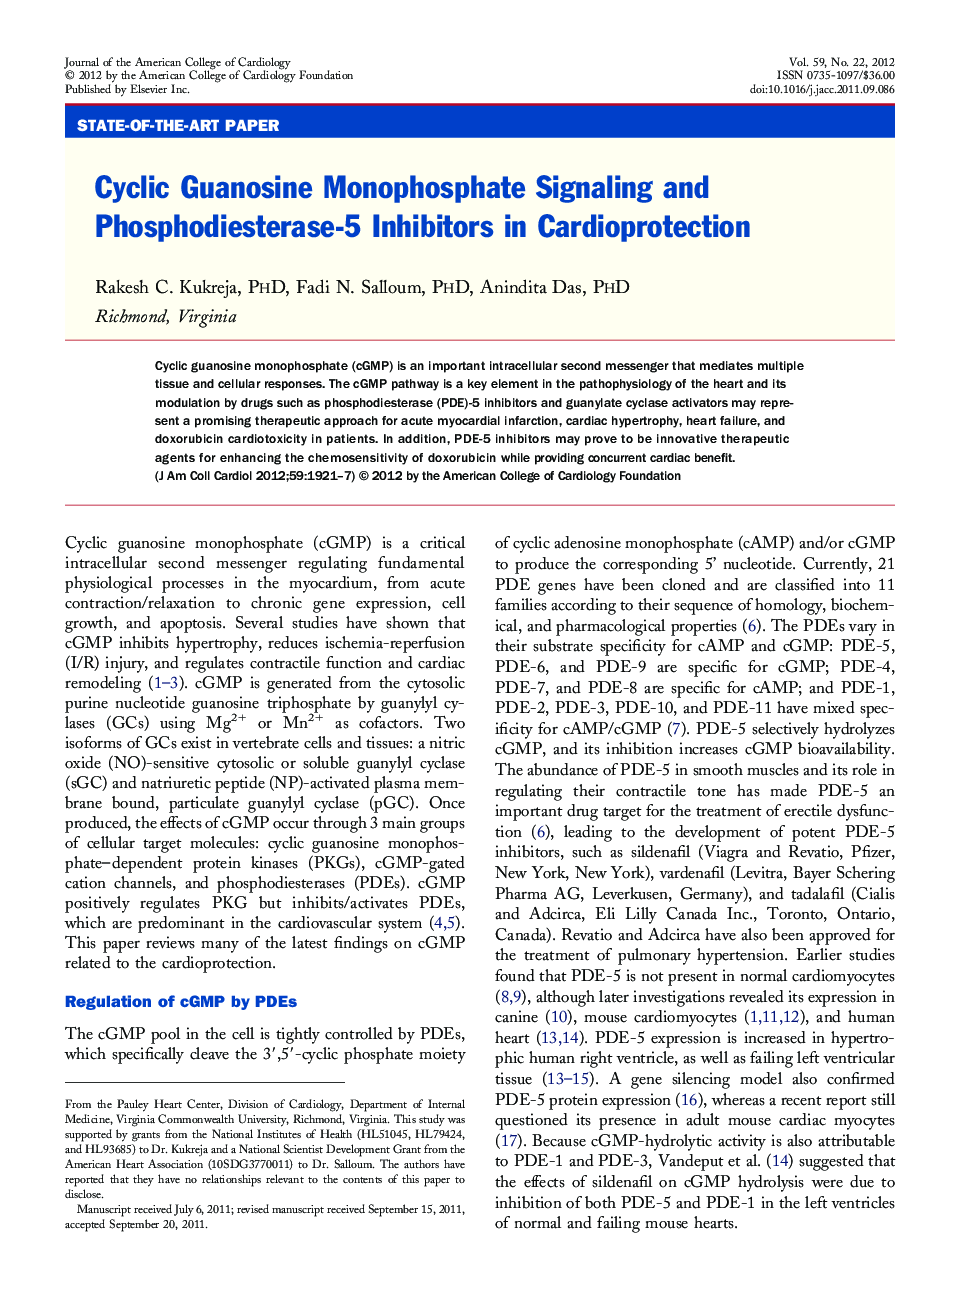 Cyclic Guanosine Monophosphate Signaling and Phosphodiesterase-5 Inhibitors in Cardioprotection 